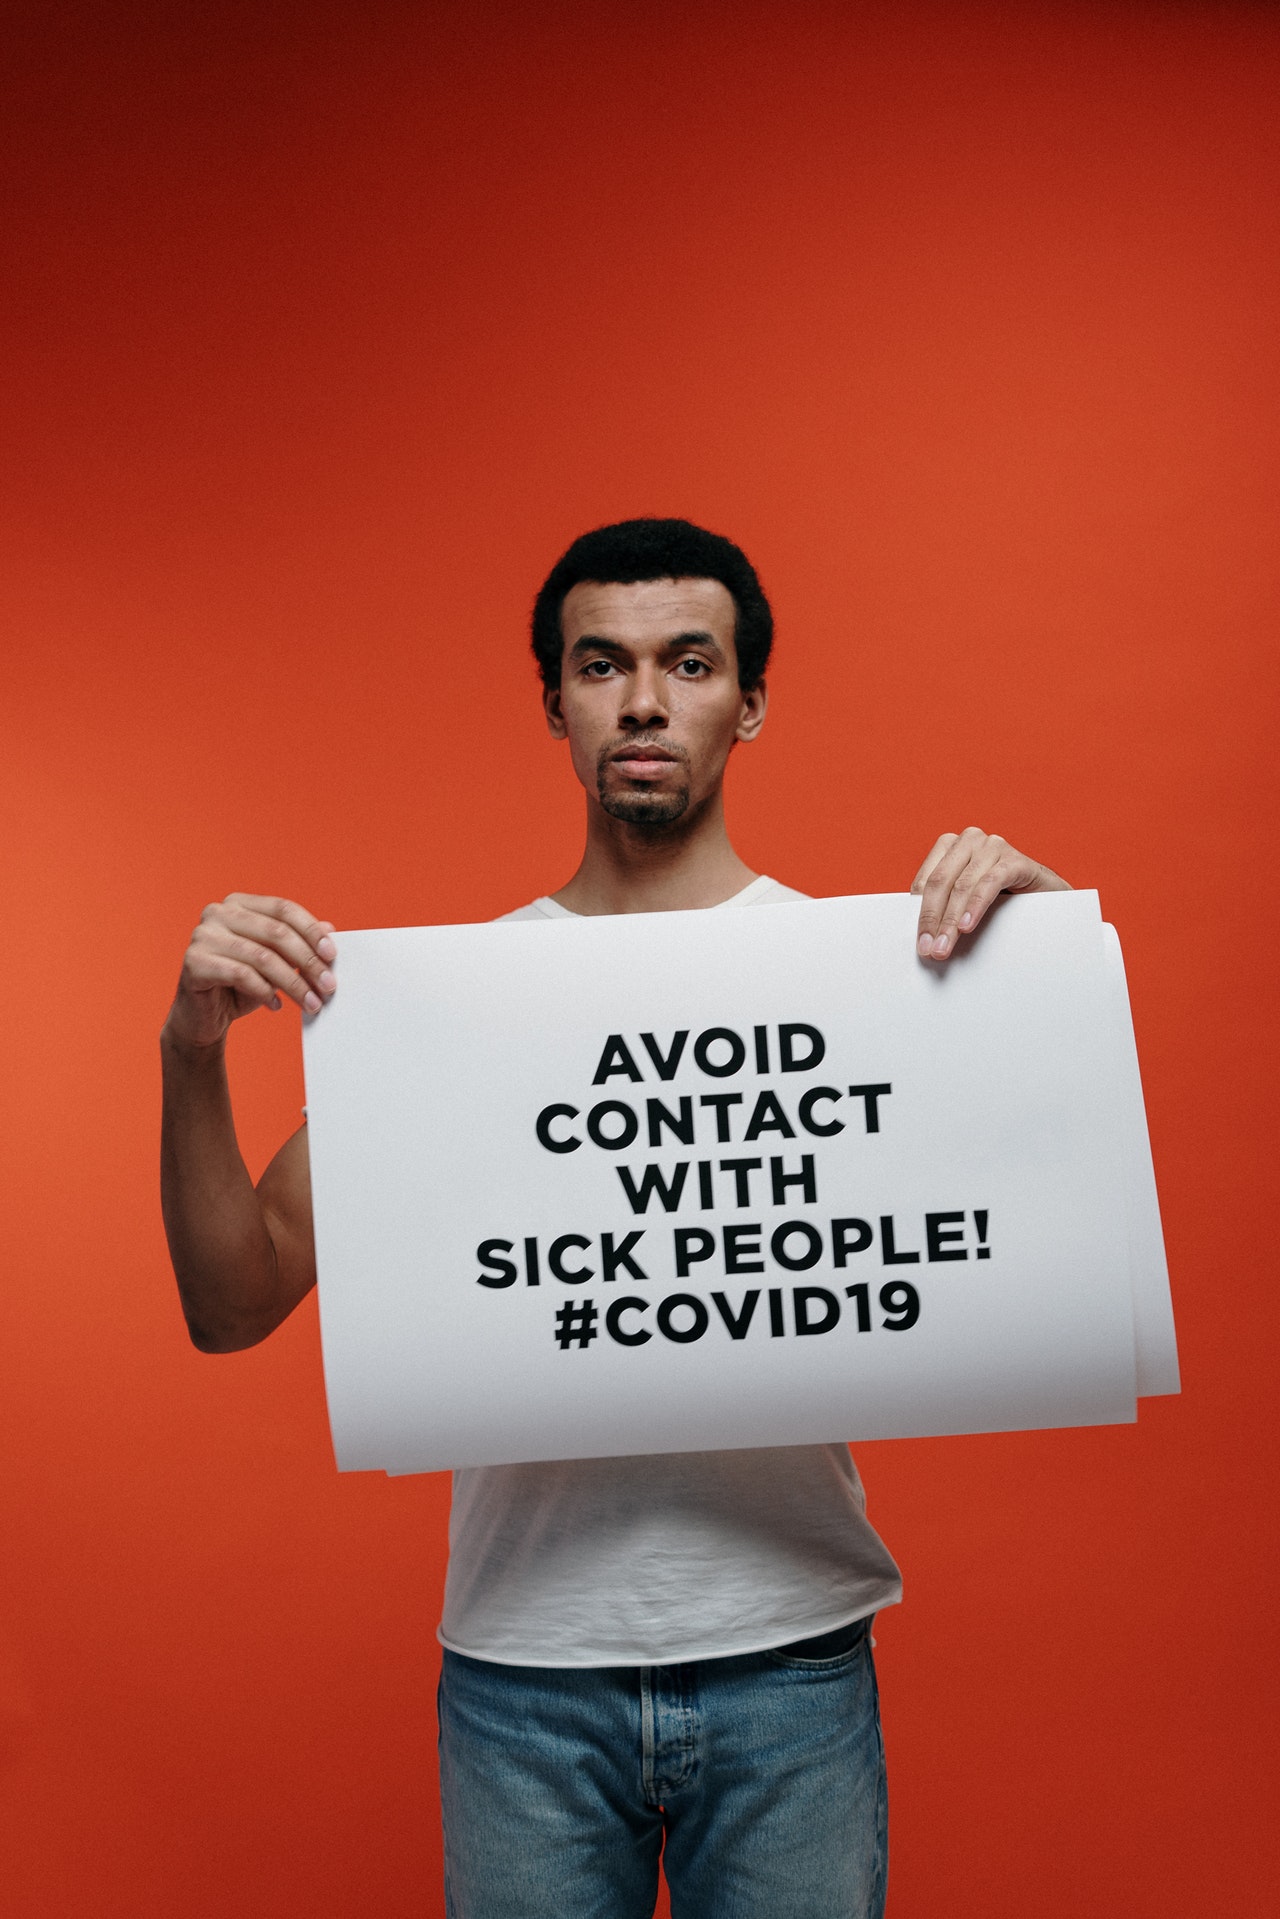 COVID-19 Tests: Extra Services You Should Contact Your Doctor About To Discuss Your Options